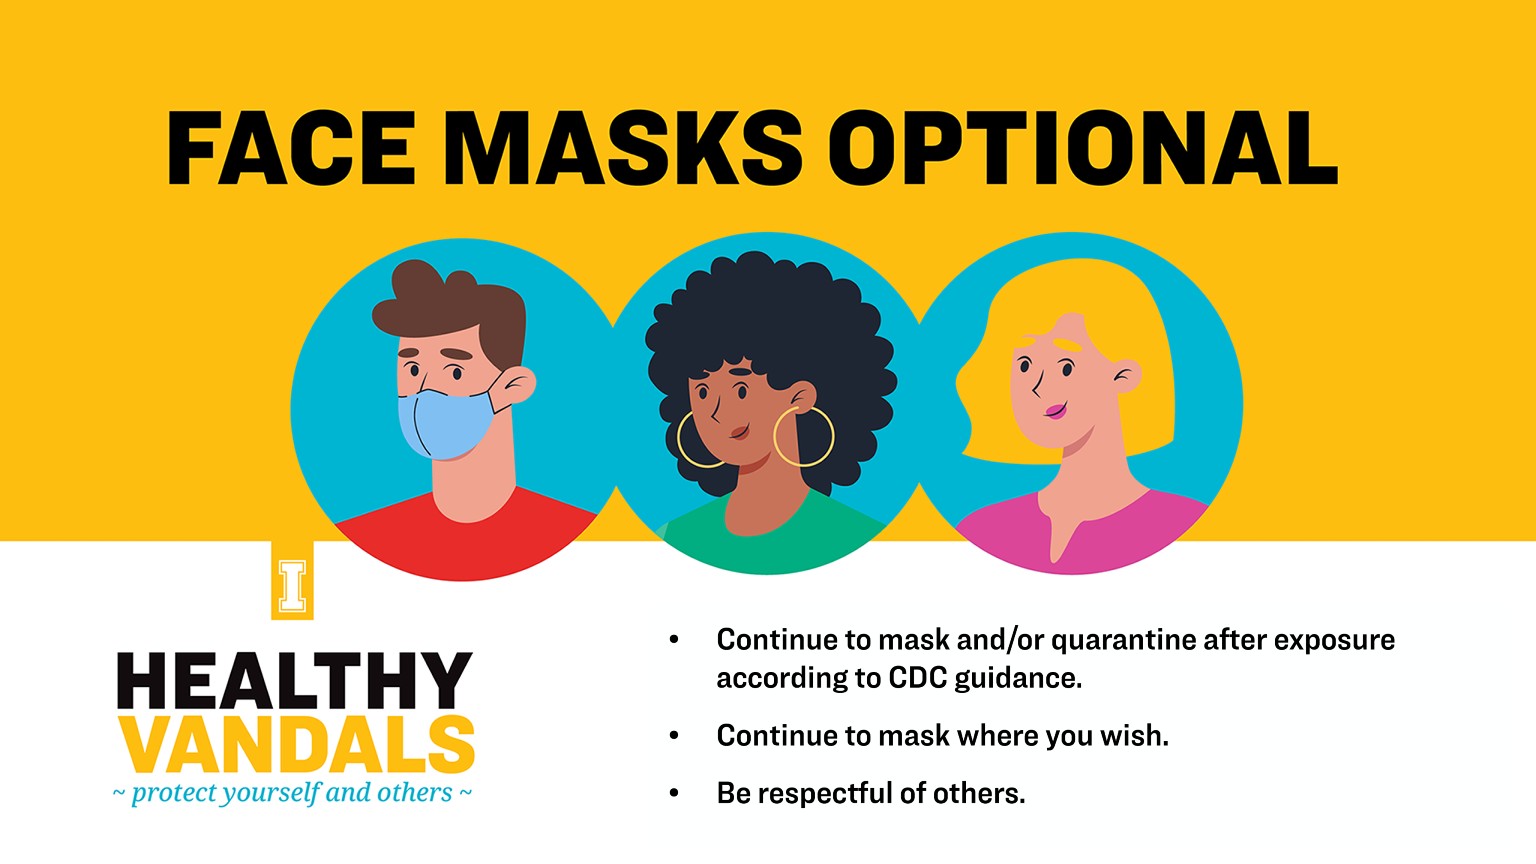 "Face masks optional. Continue to mask and/or quarantine after exposure according to CDC guidelines. Continue to mask where you wish. Be respectful of others."